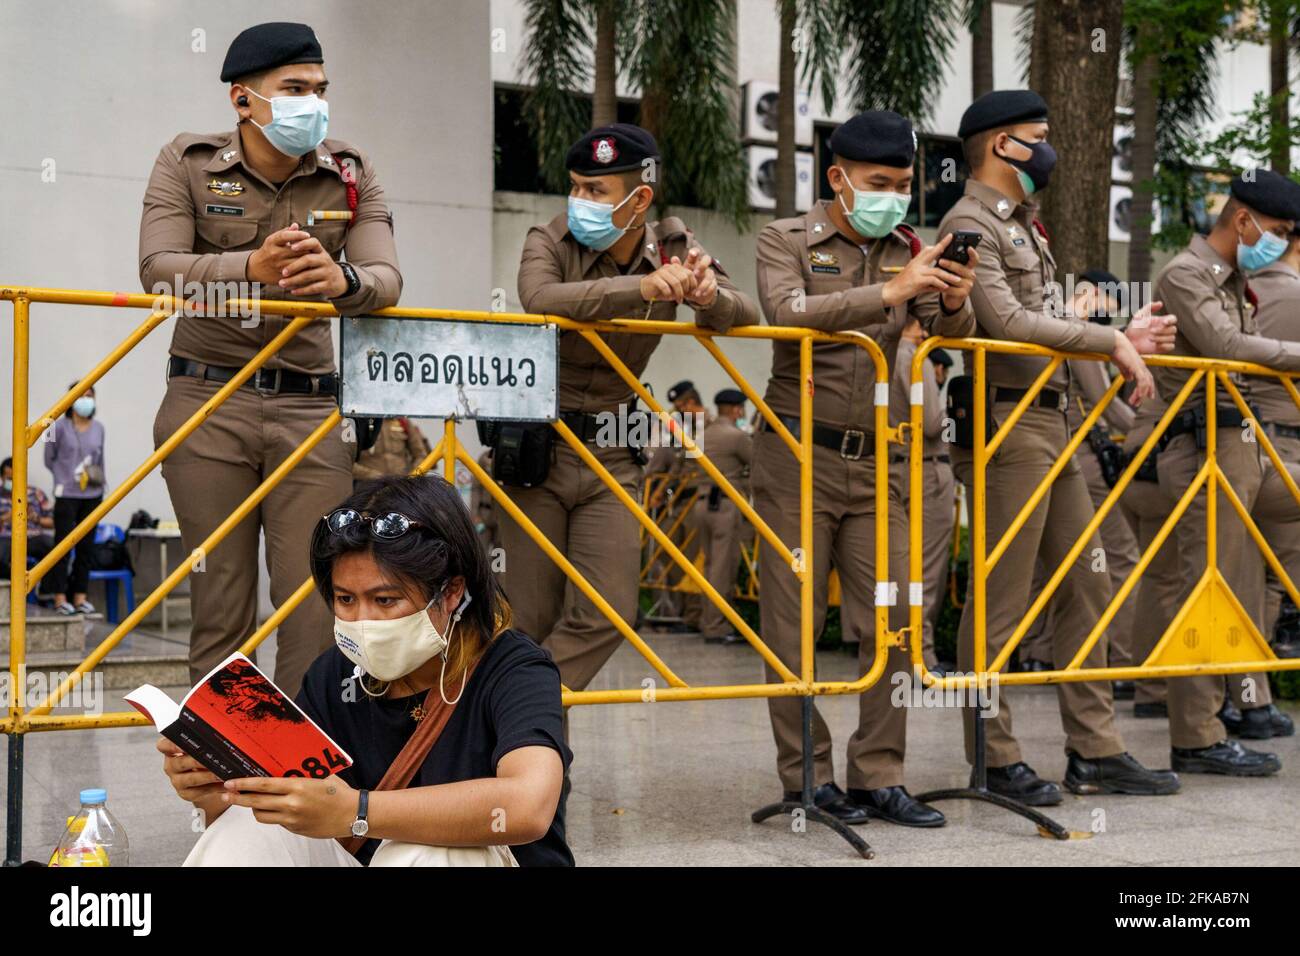 Bangkok, Thailand. 29th Apr, 2021. A protestor reading the 1984, a dystopia novel written by George Orwell, in front of a police barricade following the denial of bail requests of all 7 detained protestors, including Penguin who is on his 45th day of hunger strike. Parit 'Penguin' Chiwarak's condition worsens and other 6 pro-democracy leaders as they remain in custody for lesse-majeste law aka article 112 at the Criminal Court that saw no reason to change its previous orders. (Photo by Watcharawit Phudork/SOPA Images/Sipa USA) Credit: Sipa USA/Alamy Live News Stock Photo